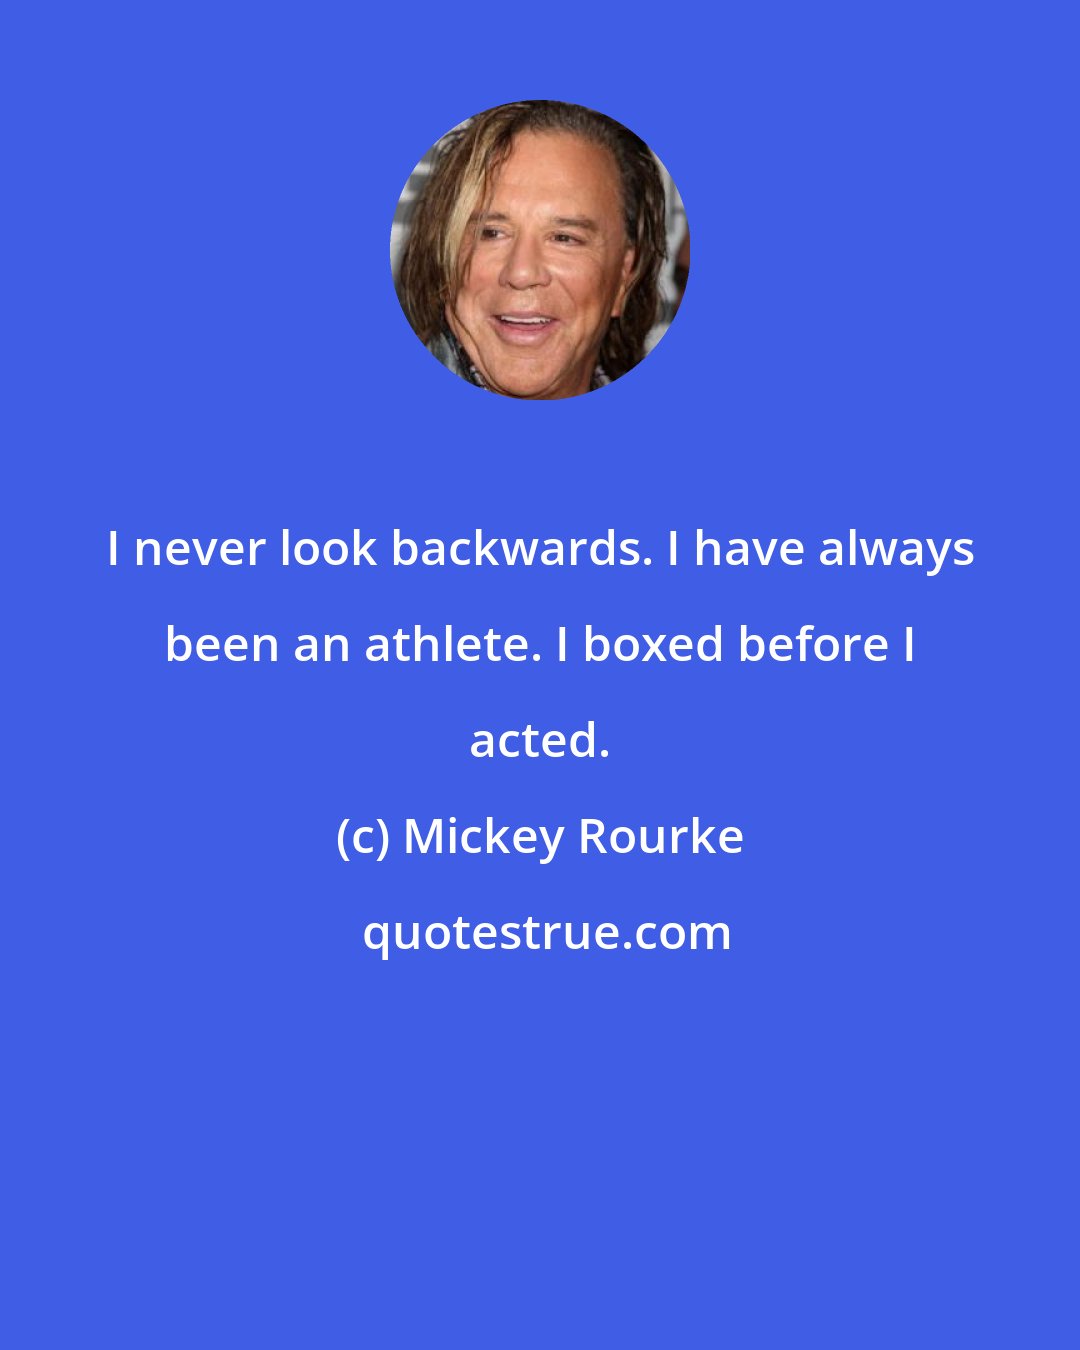 Mickey Rourke: I never look backwards. I have always been an athlete. I boxed before I acted.